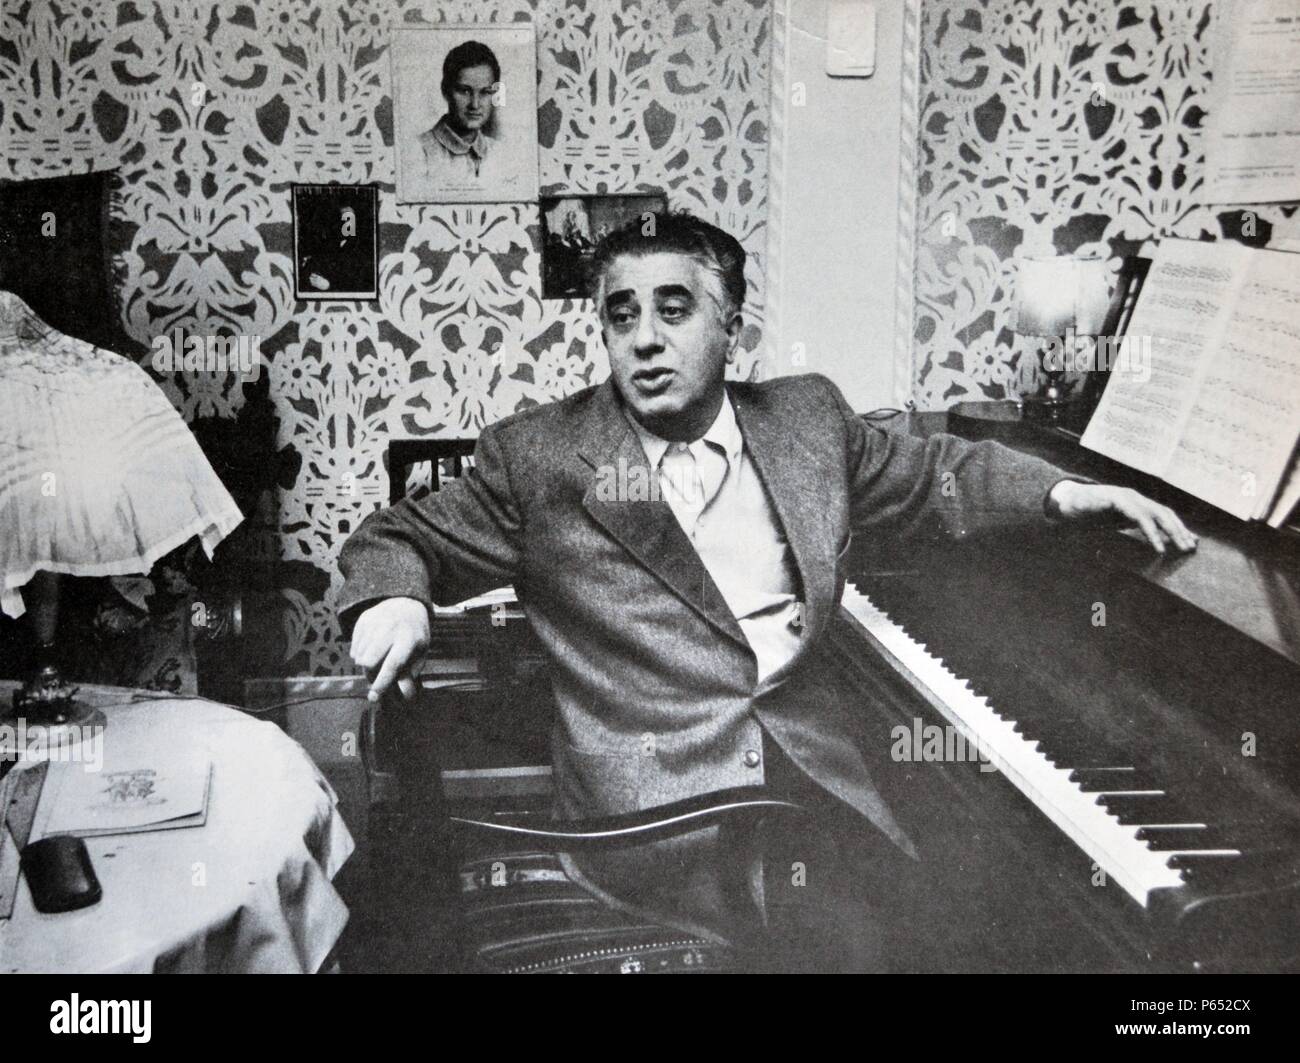 Aram Il'yich Khachaturian 1903 – 1978. Soviet Armenian composer and conductor. He is considered one of the leading Soviet composers and the most renowned Armenian composer of the 20th century. Stock Photo